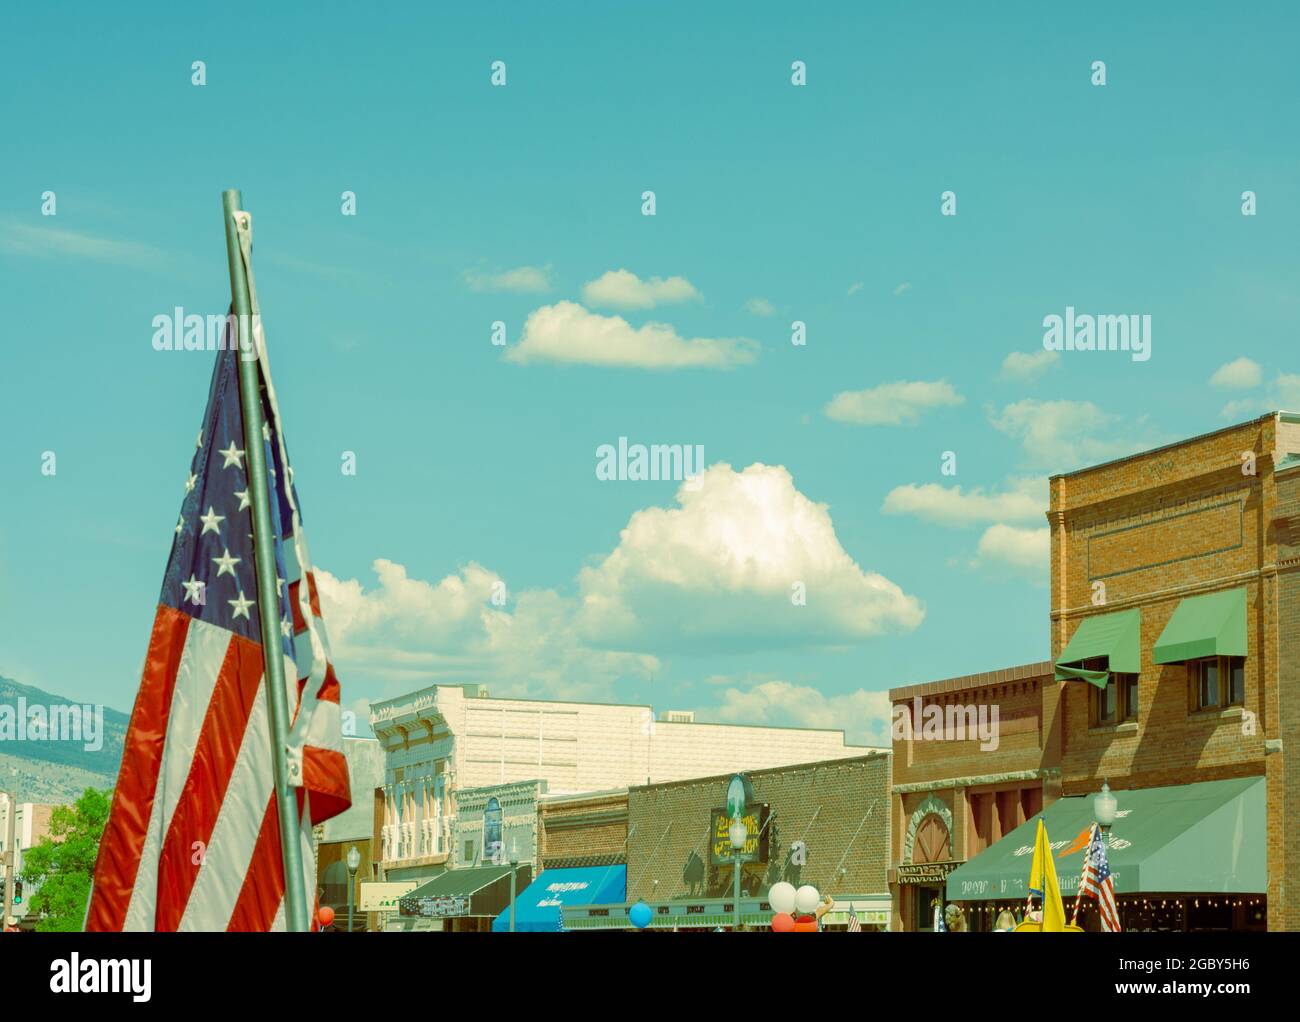 Flag waving on July parade day for the Fourth of July celebration in a small western town of Cody, Wyoming. There is room for a text message. Stock Photo